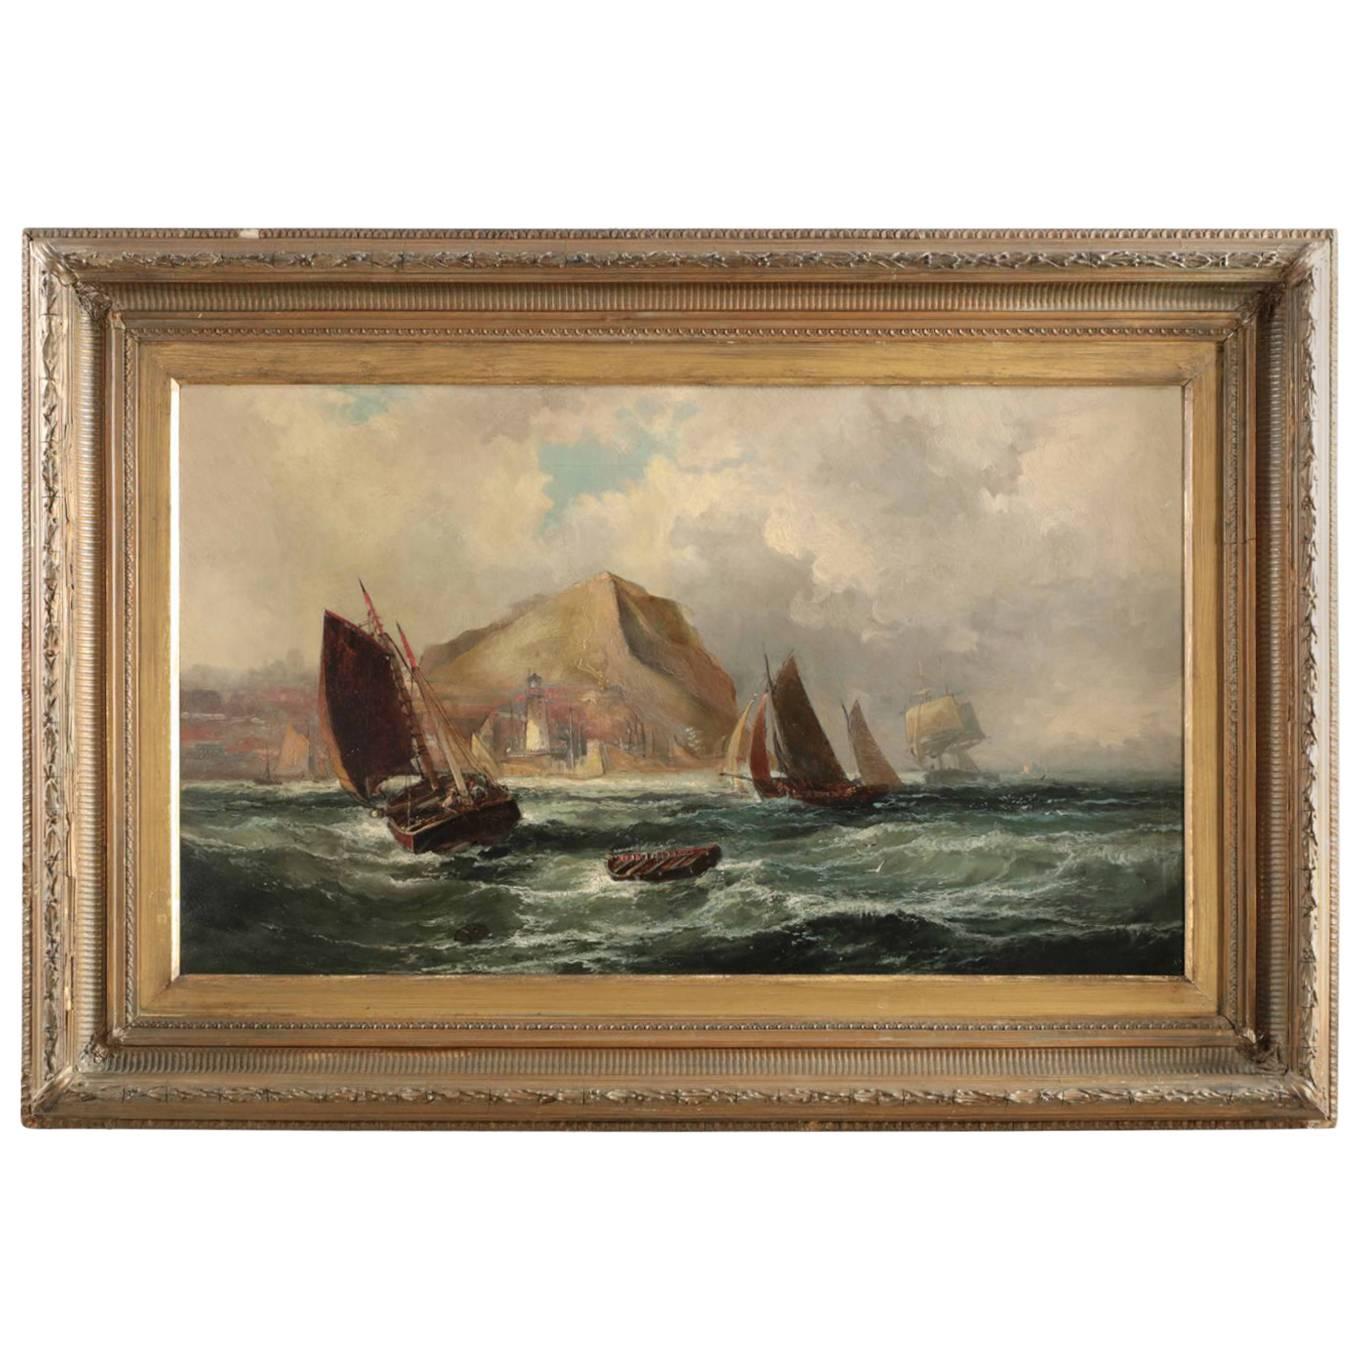 British Seascape Painting of Ships off Coast by Robert Ernest Roe